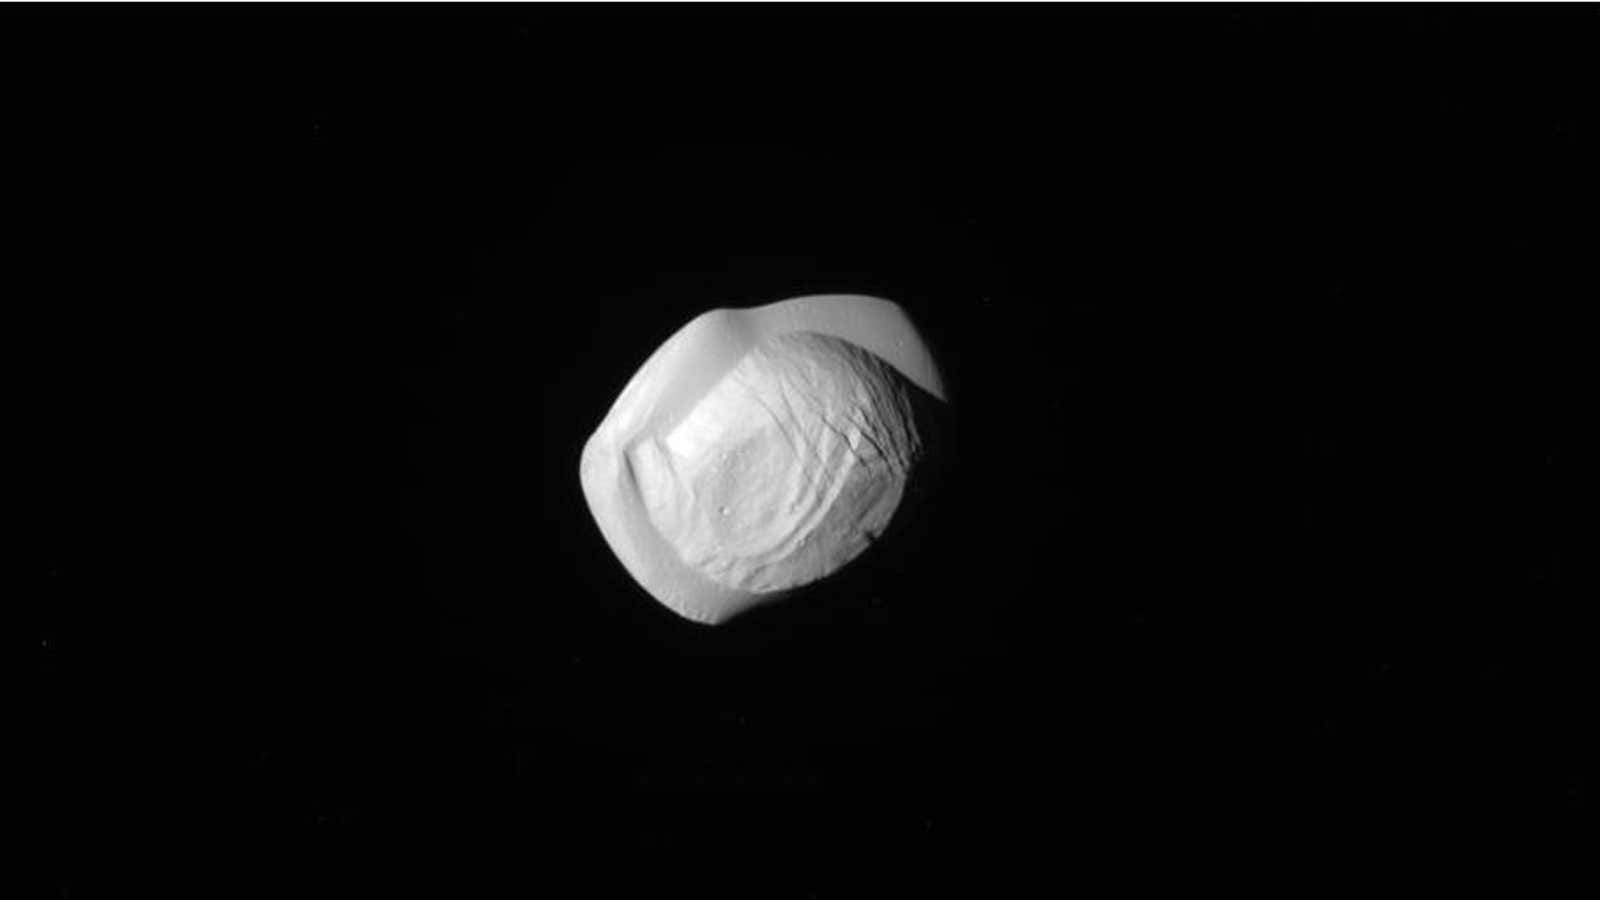 One of the closest image of Saturn’s moon Pan to date.